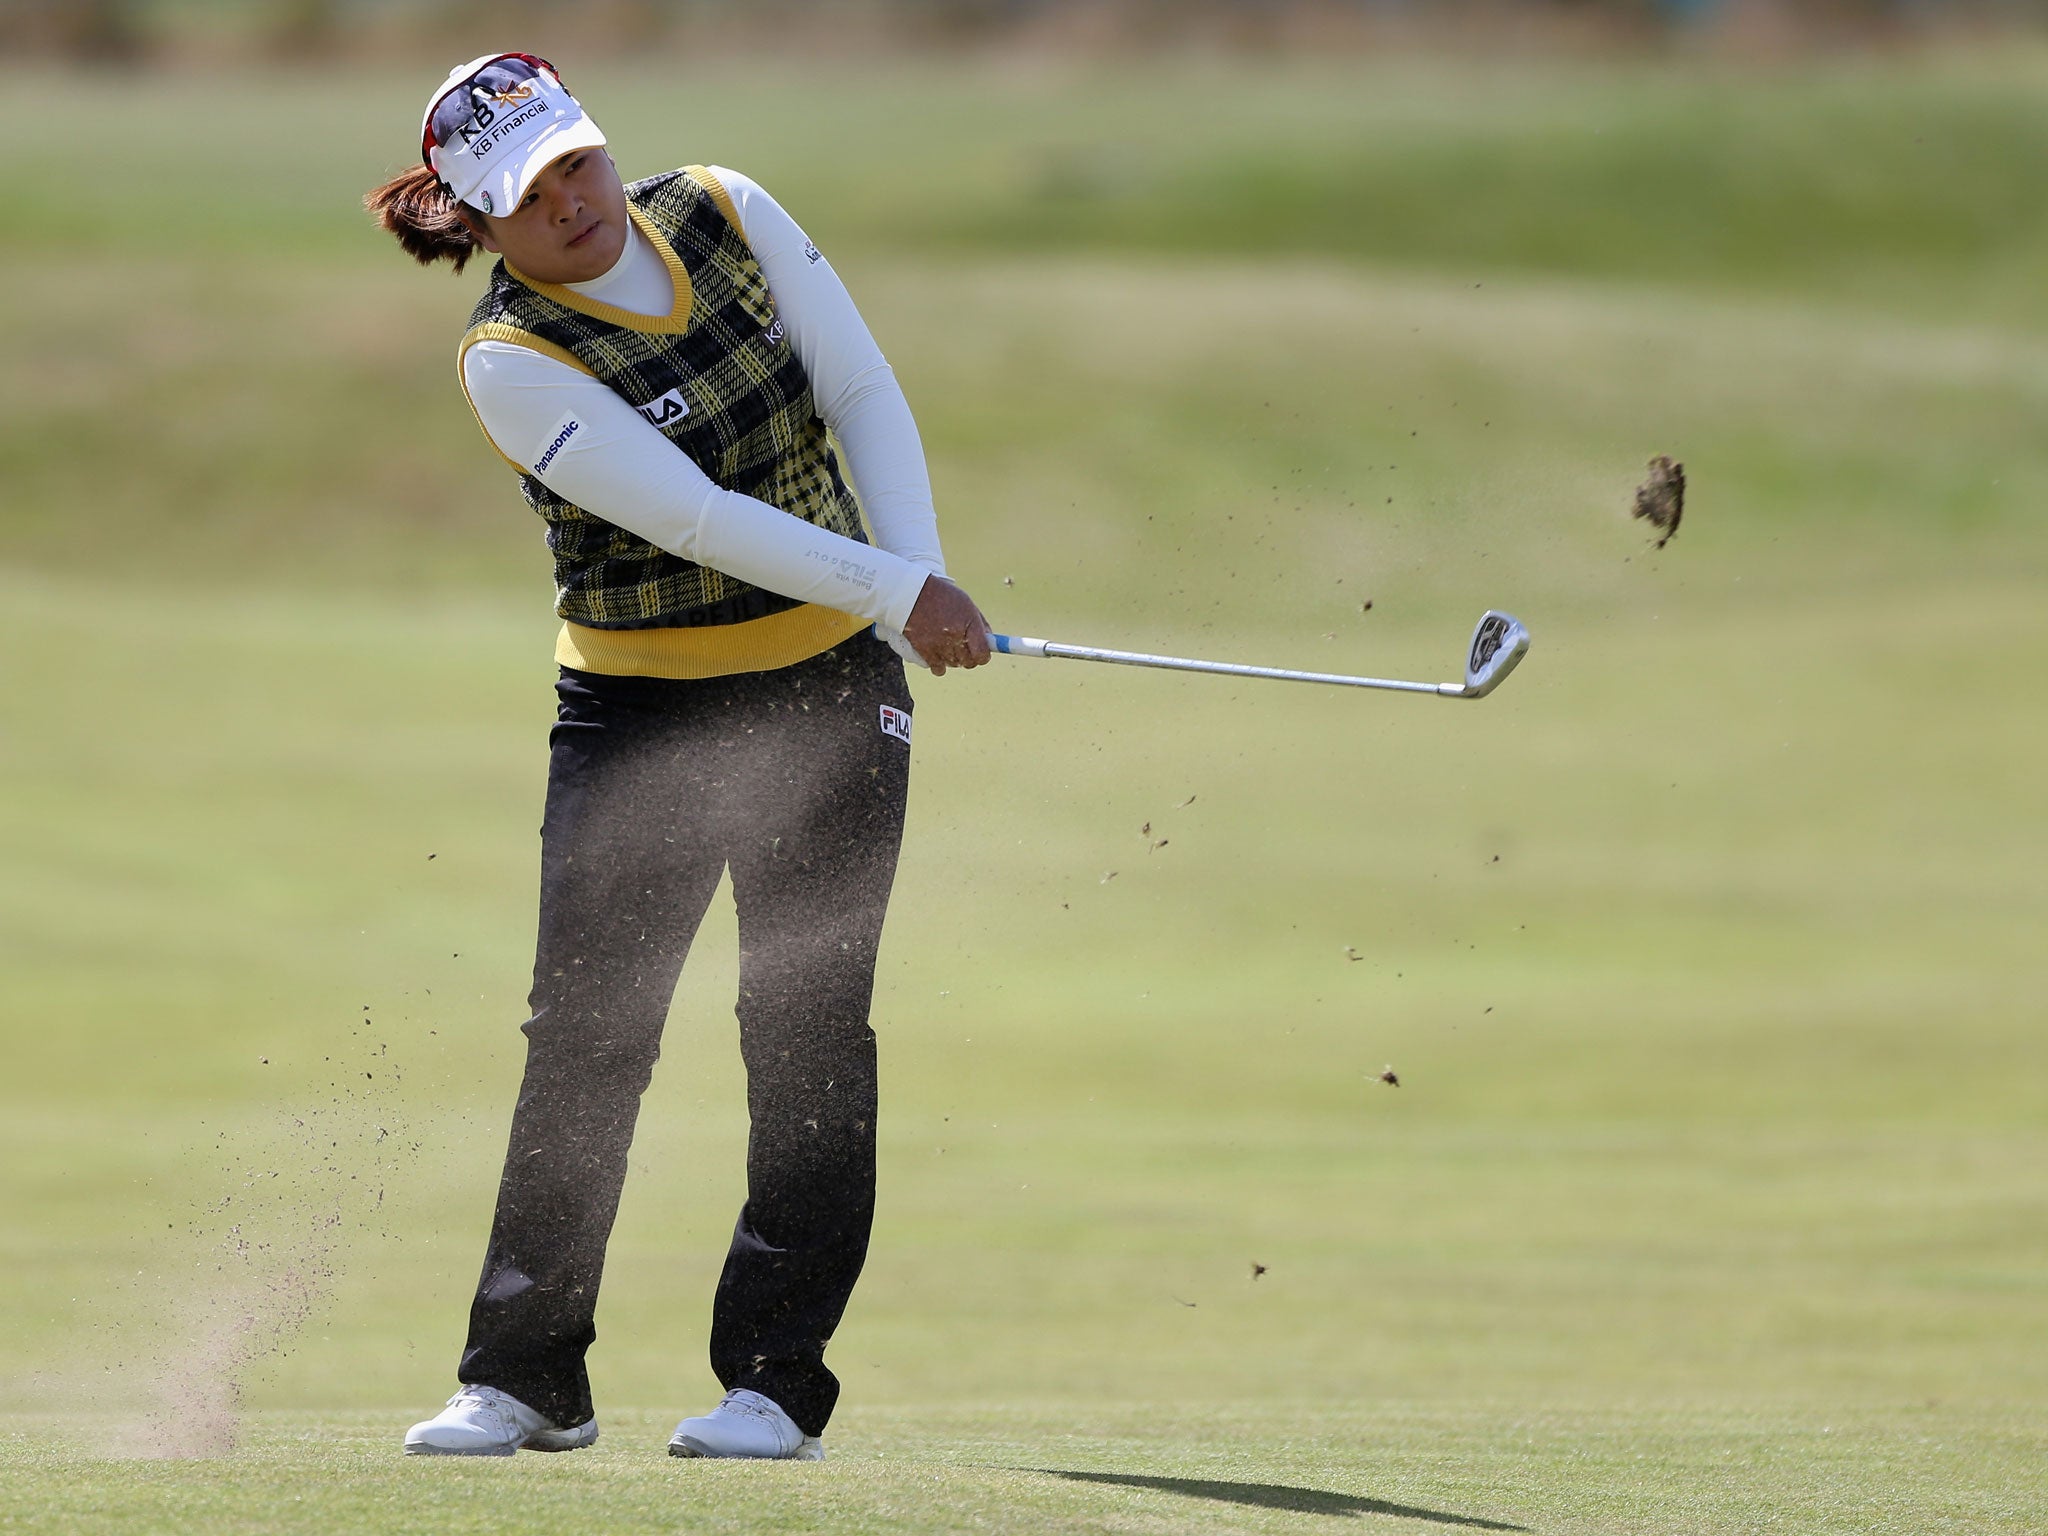 Inbee Park in action at St Andrews. Those who constantly seek to compare women’s sport to the men are missing the point